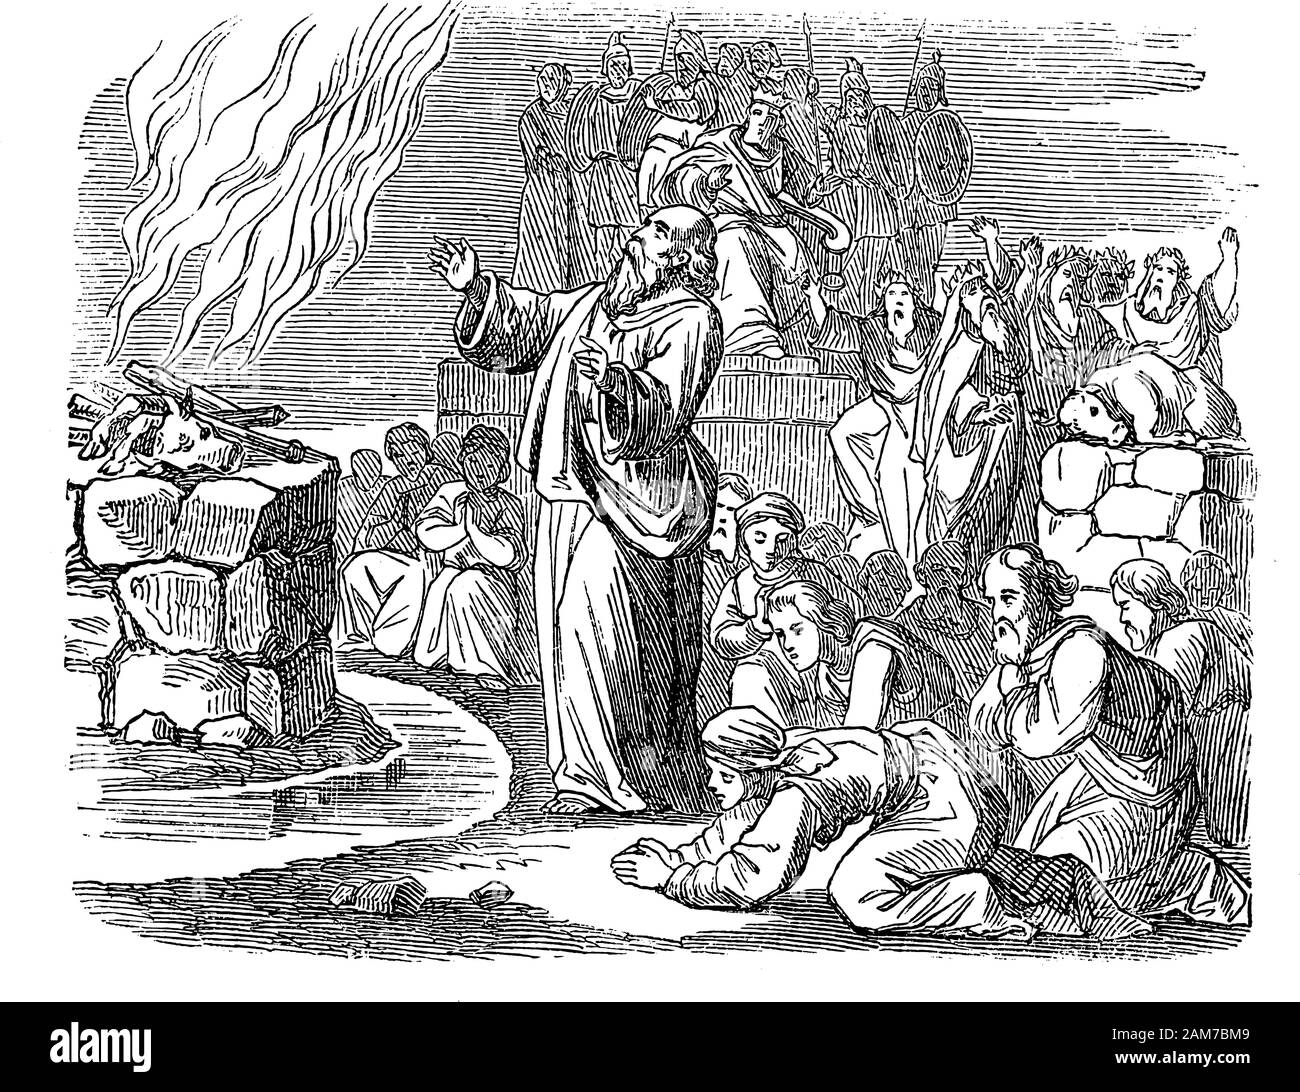 Vintage drawing or engraving of biblical story of prophet Elijah on Mount Carmel asking God to set fire and defeating Baal.Bible, Old Testament, 1 Kings 18. Biblische Geschichte , Germany 1859. Stock Vector